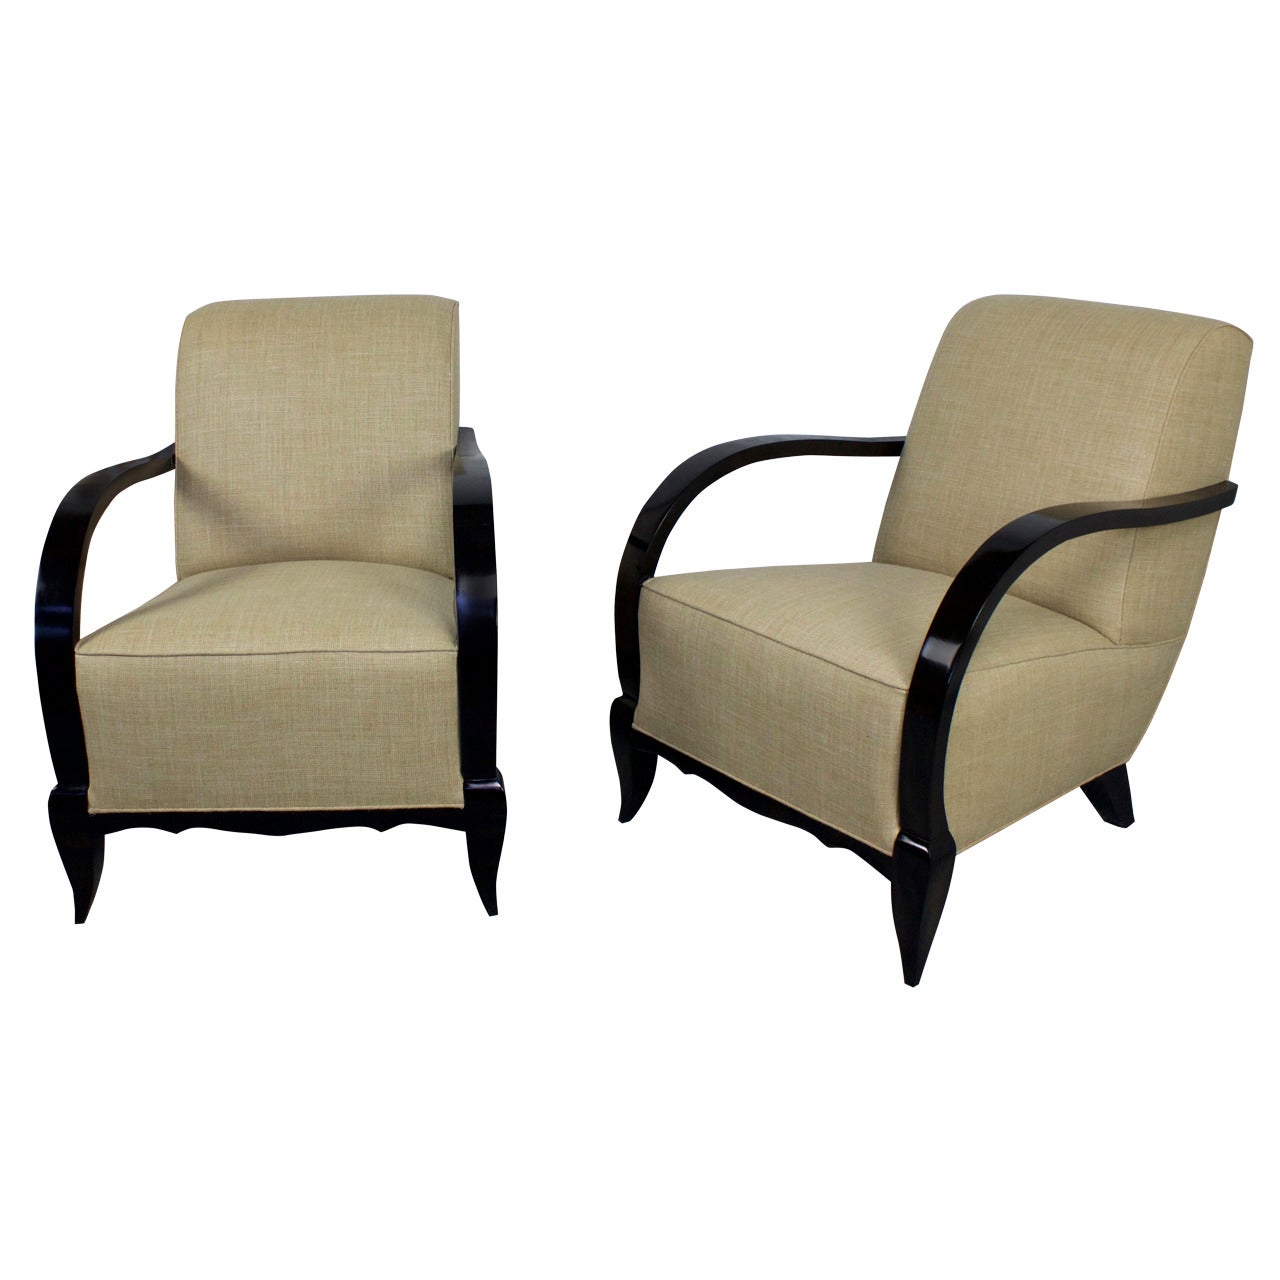 Pair of French 1940s Art Deco Armchairs